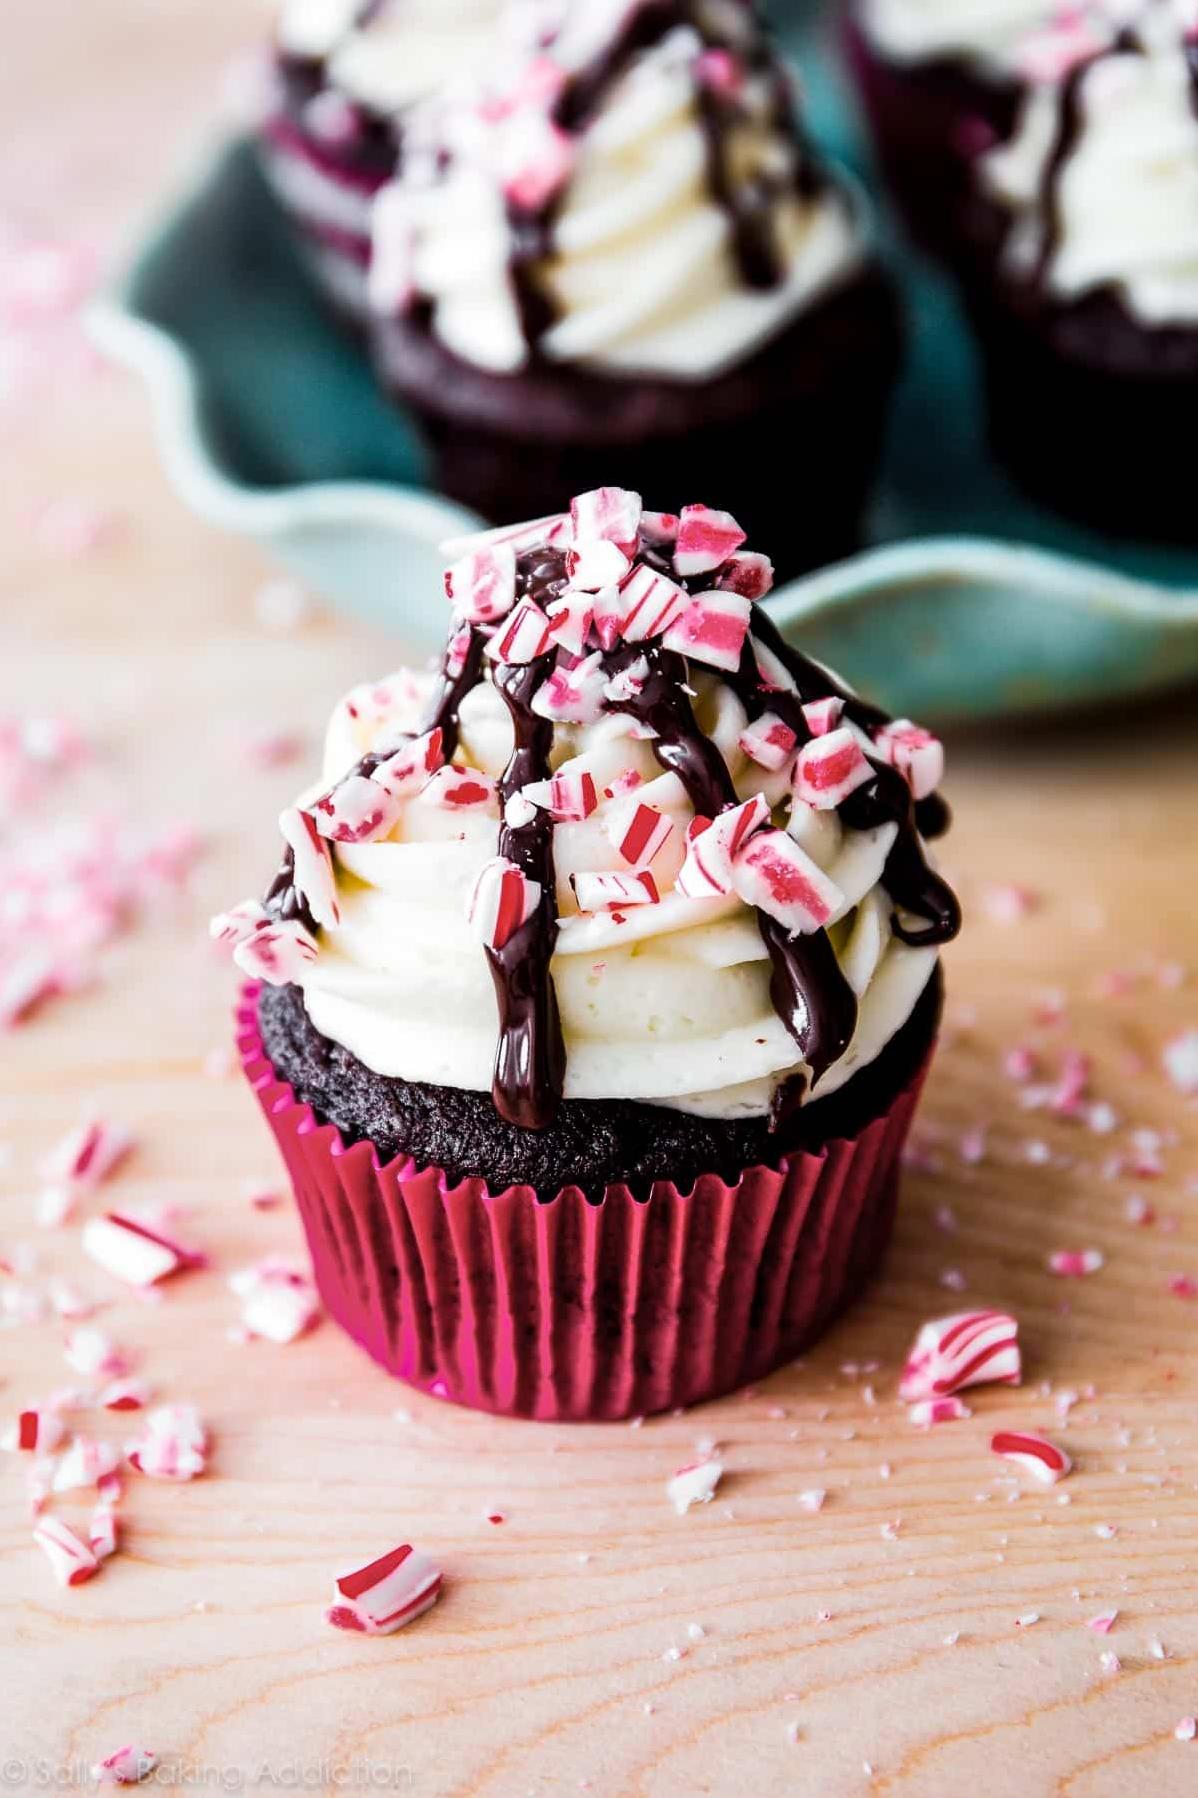  Satisfy your sweet tooth with these Skinny Peppermint Mocha Cupcakes!